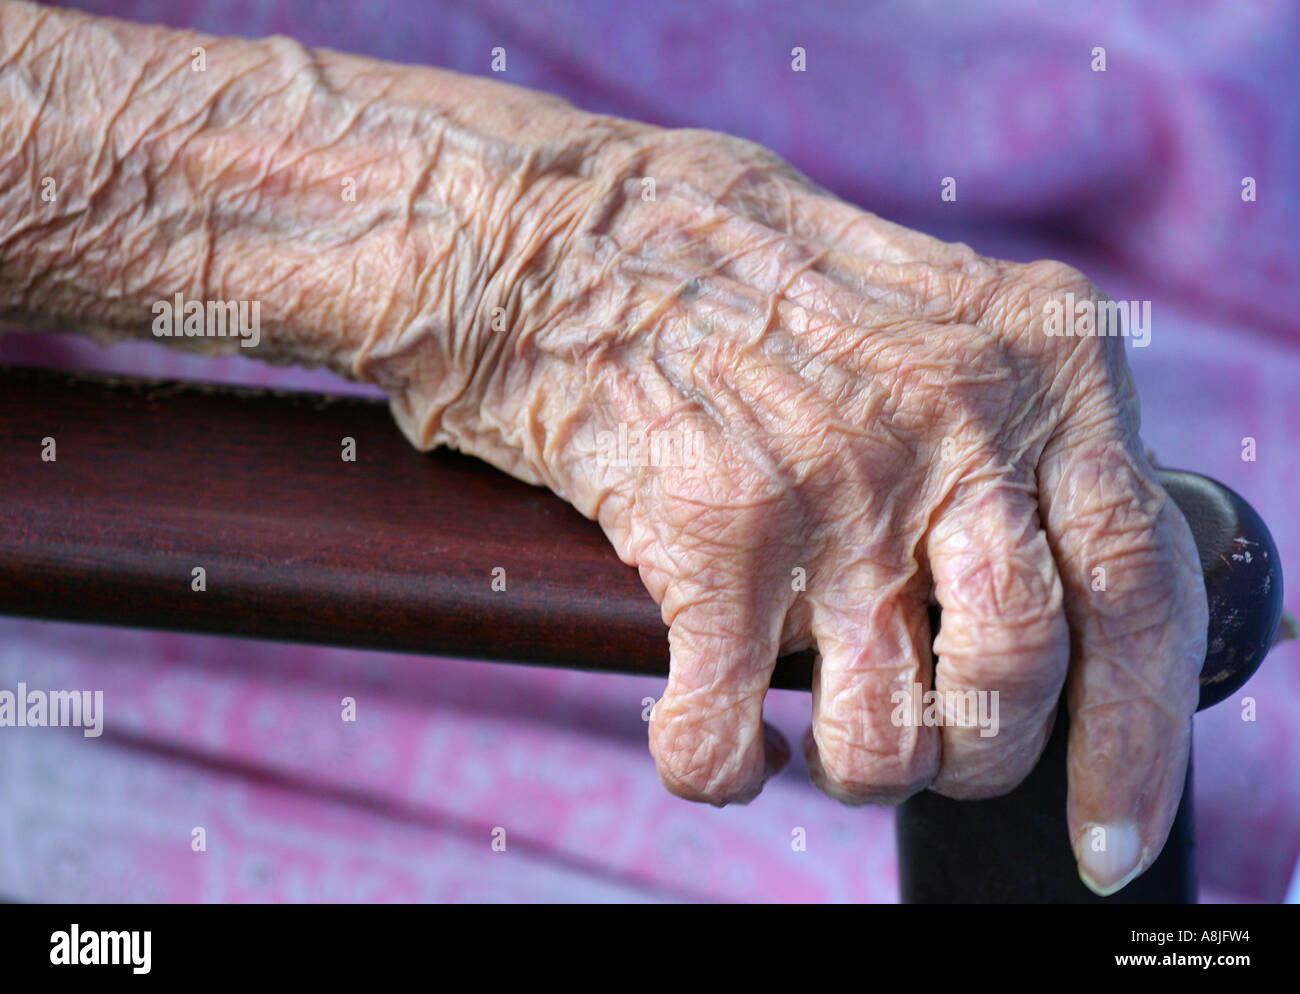 the-wrinkled-skin-of-a-94-year-old-asian-lady-at-a-care-home-for-asian-A8JFW4.jpg